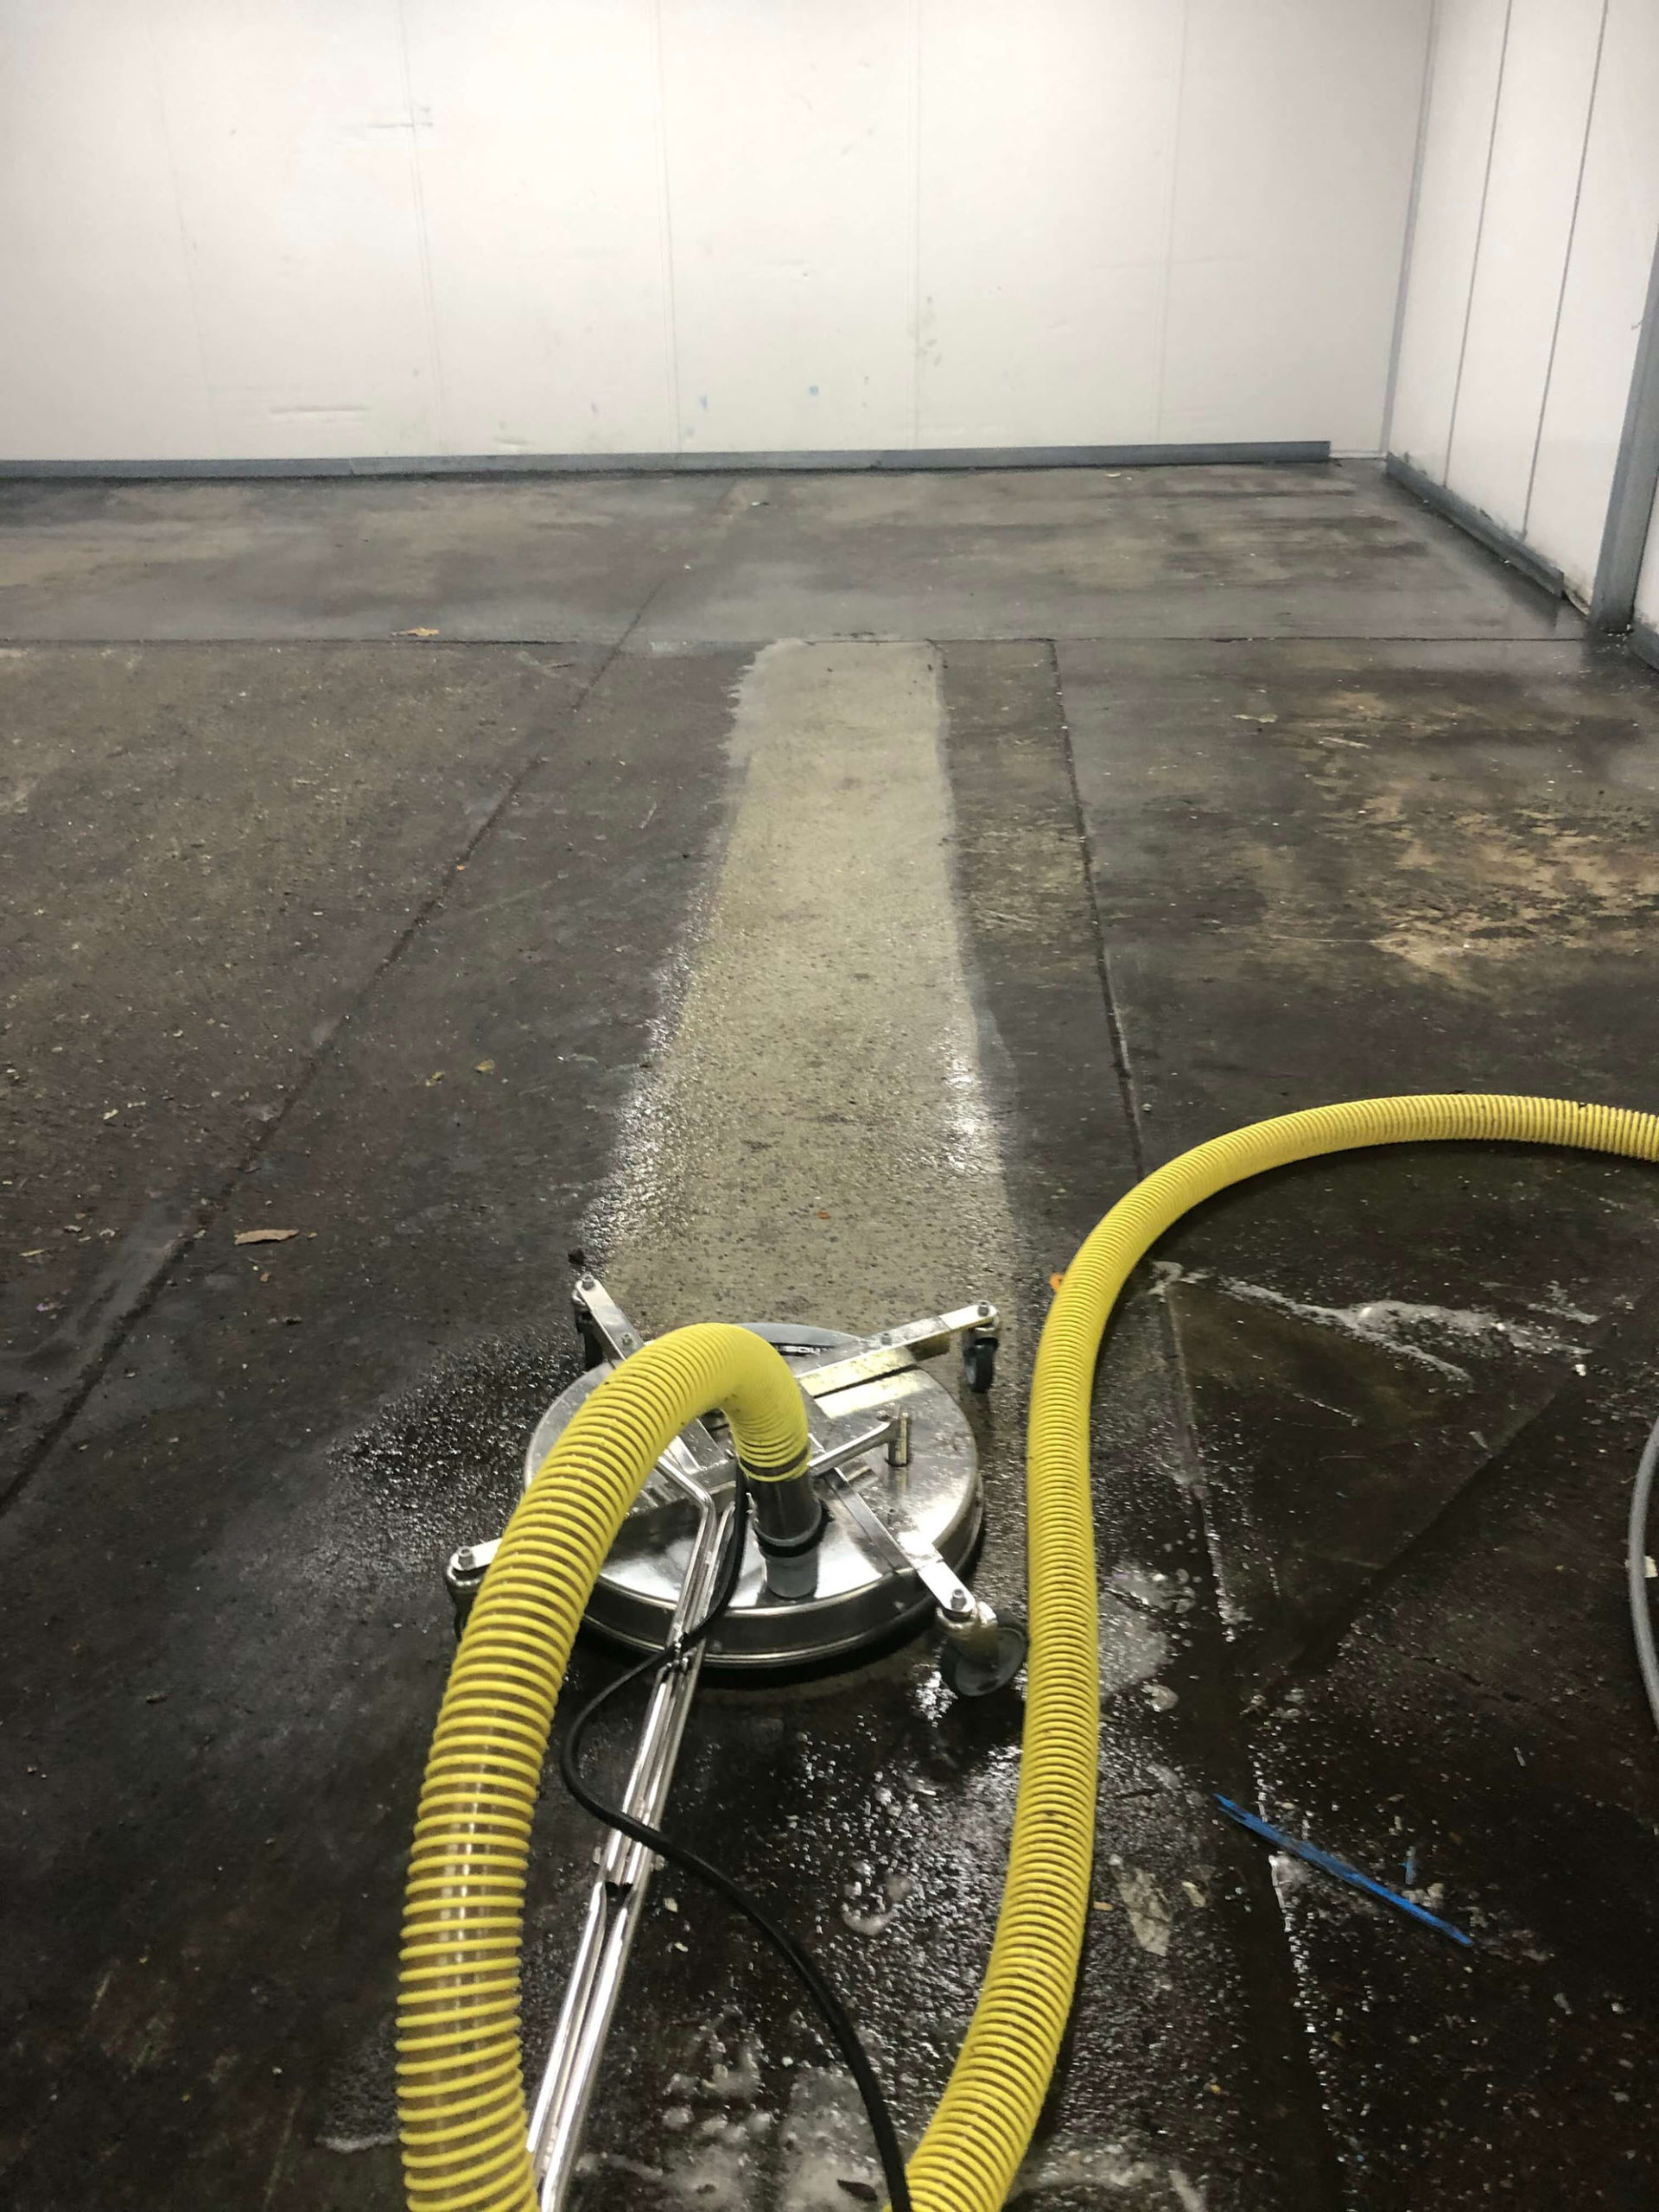 Vacuum water recover machine in use whilst professionally cleaning concrete